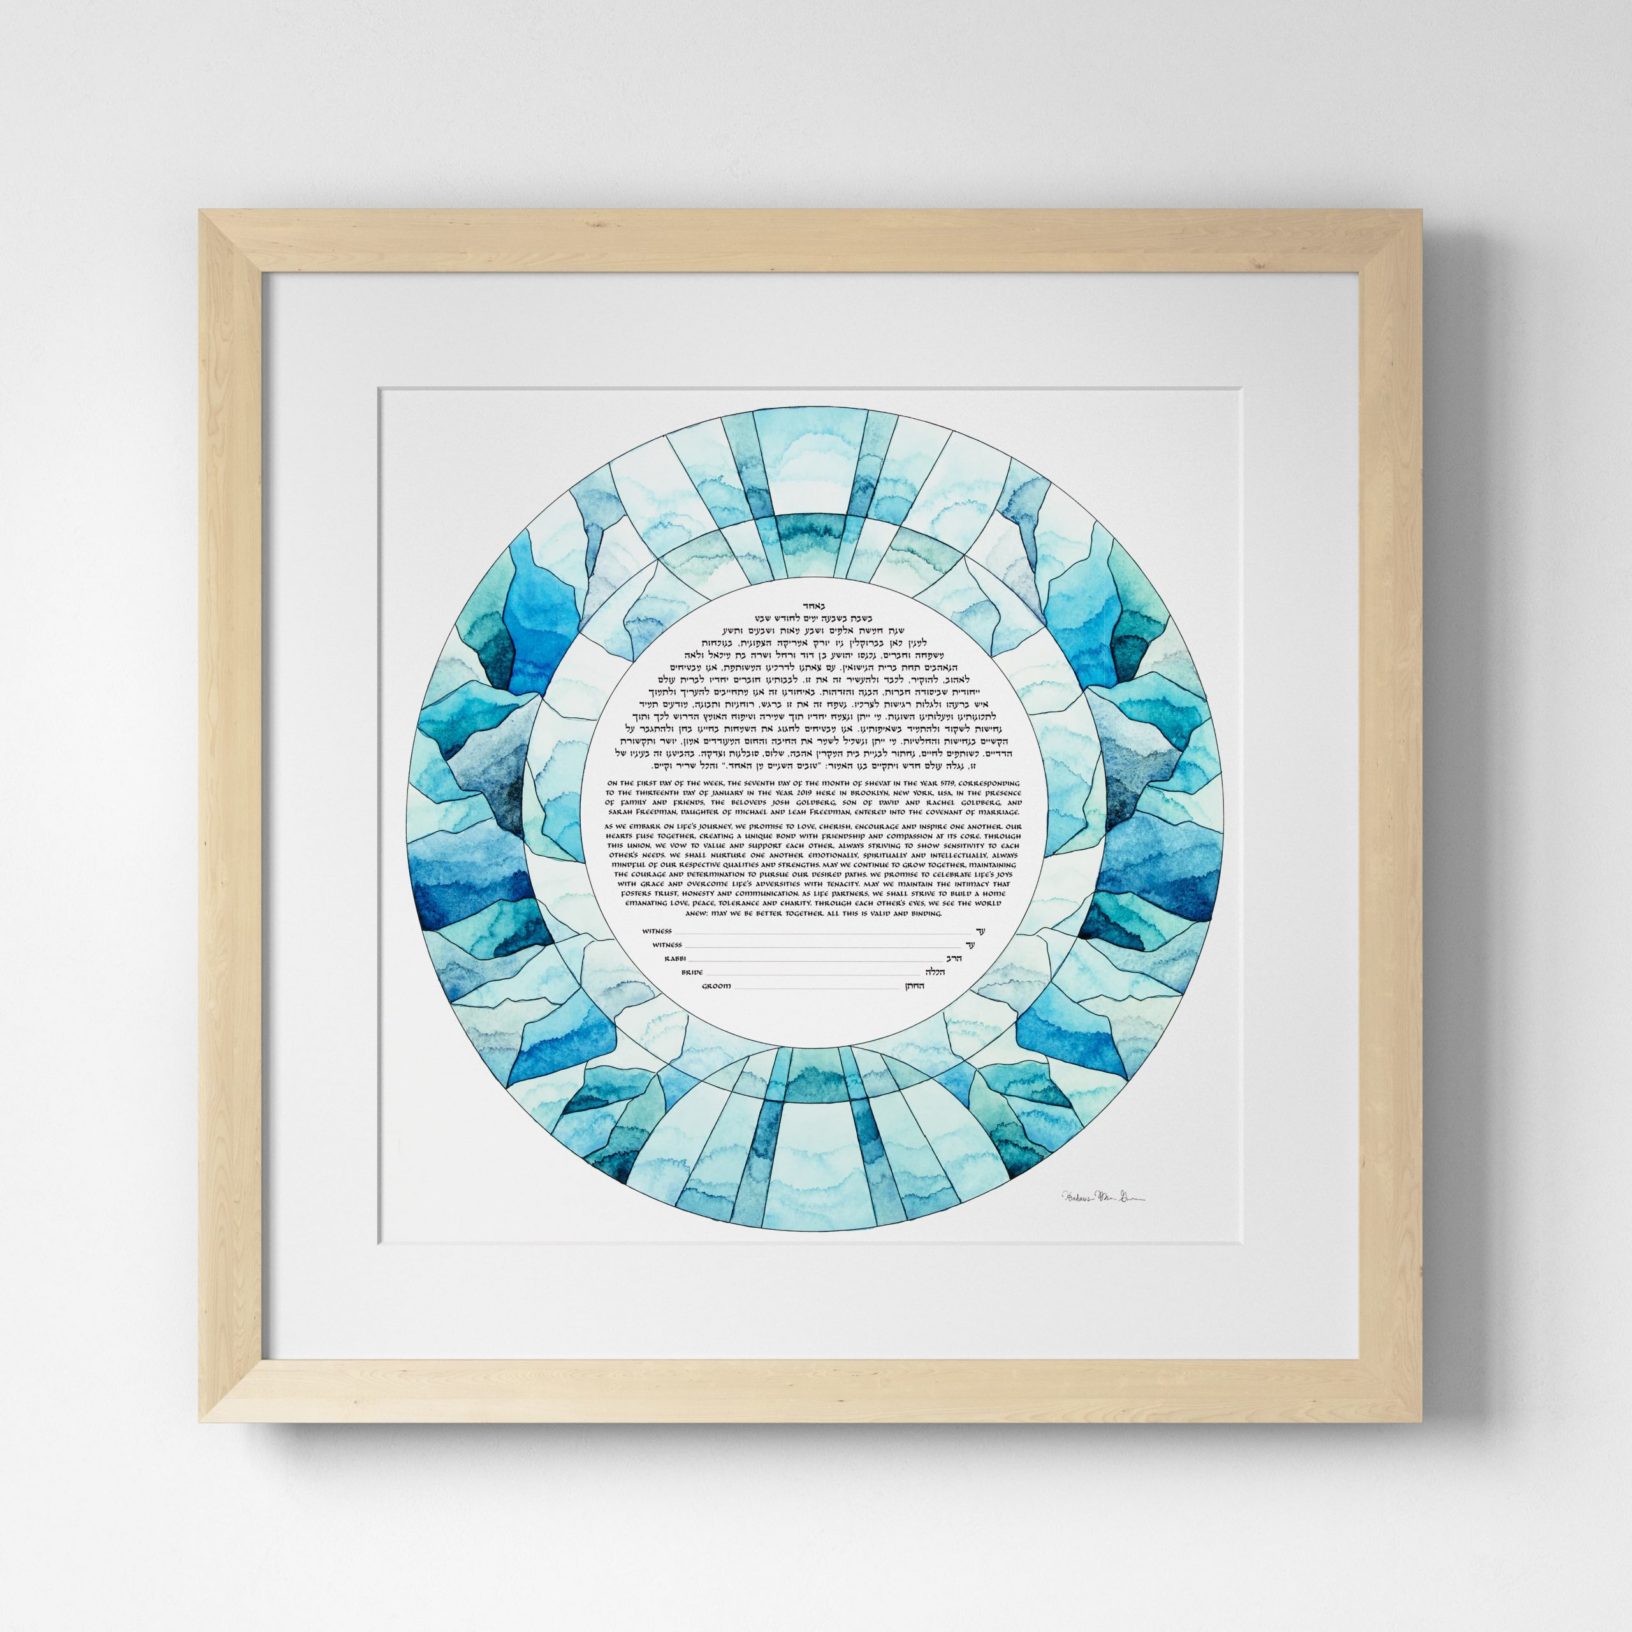 Sky Over Aquamarine Seas Ketubah Marriage Contracts by Hadass Gerson